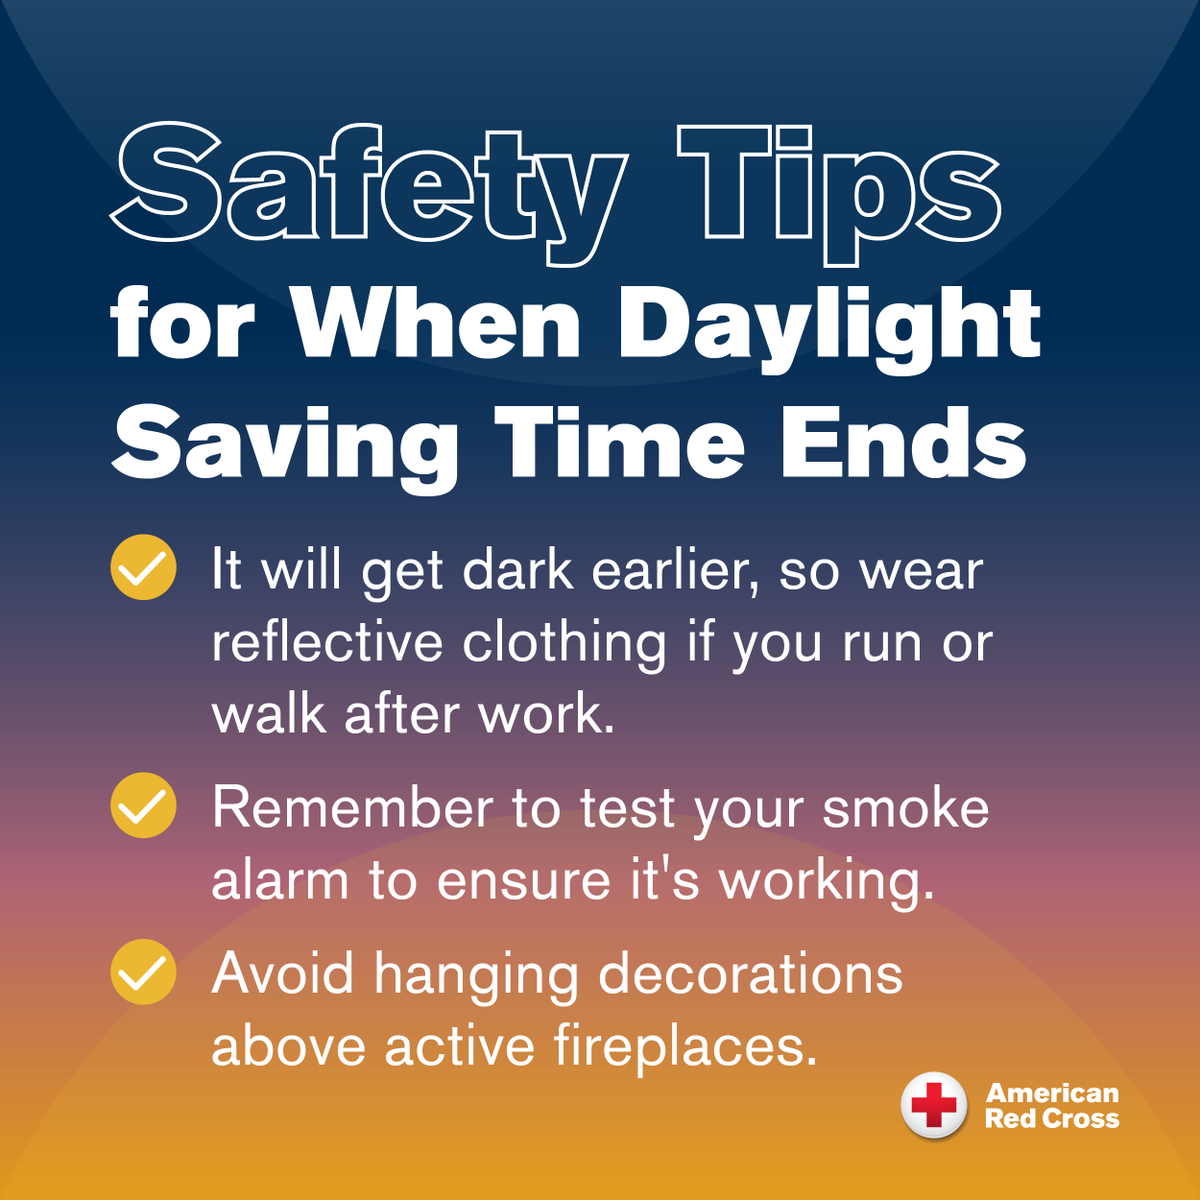 Daylight Saving Time - Quick and Dirty Tips